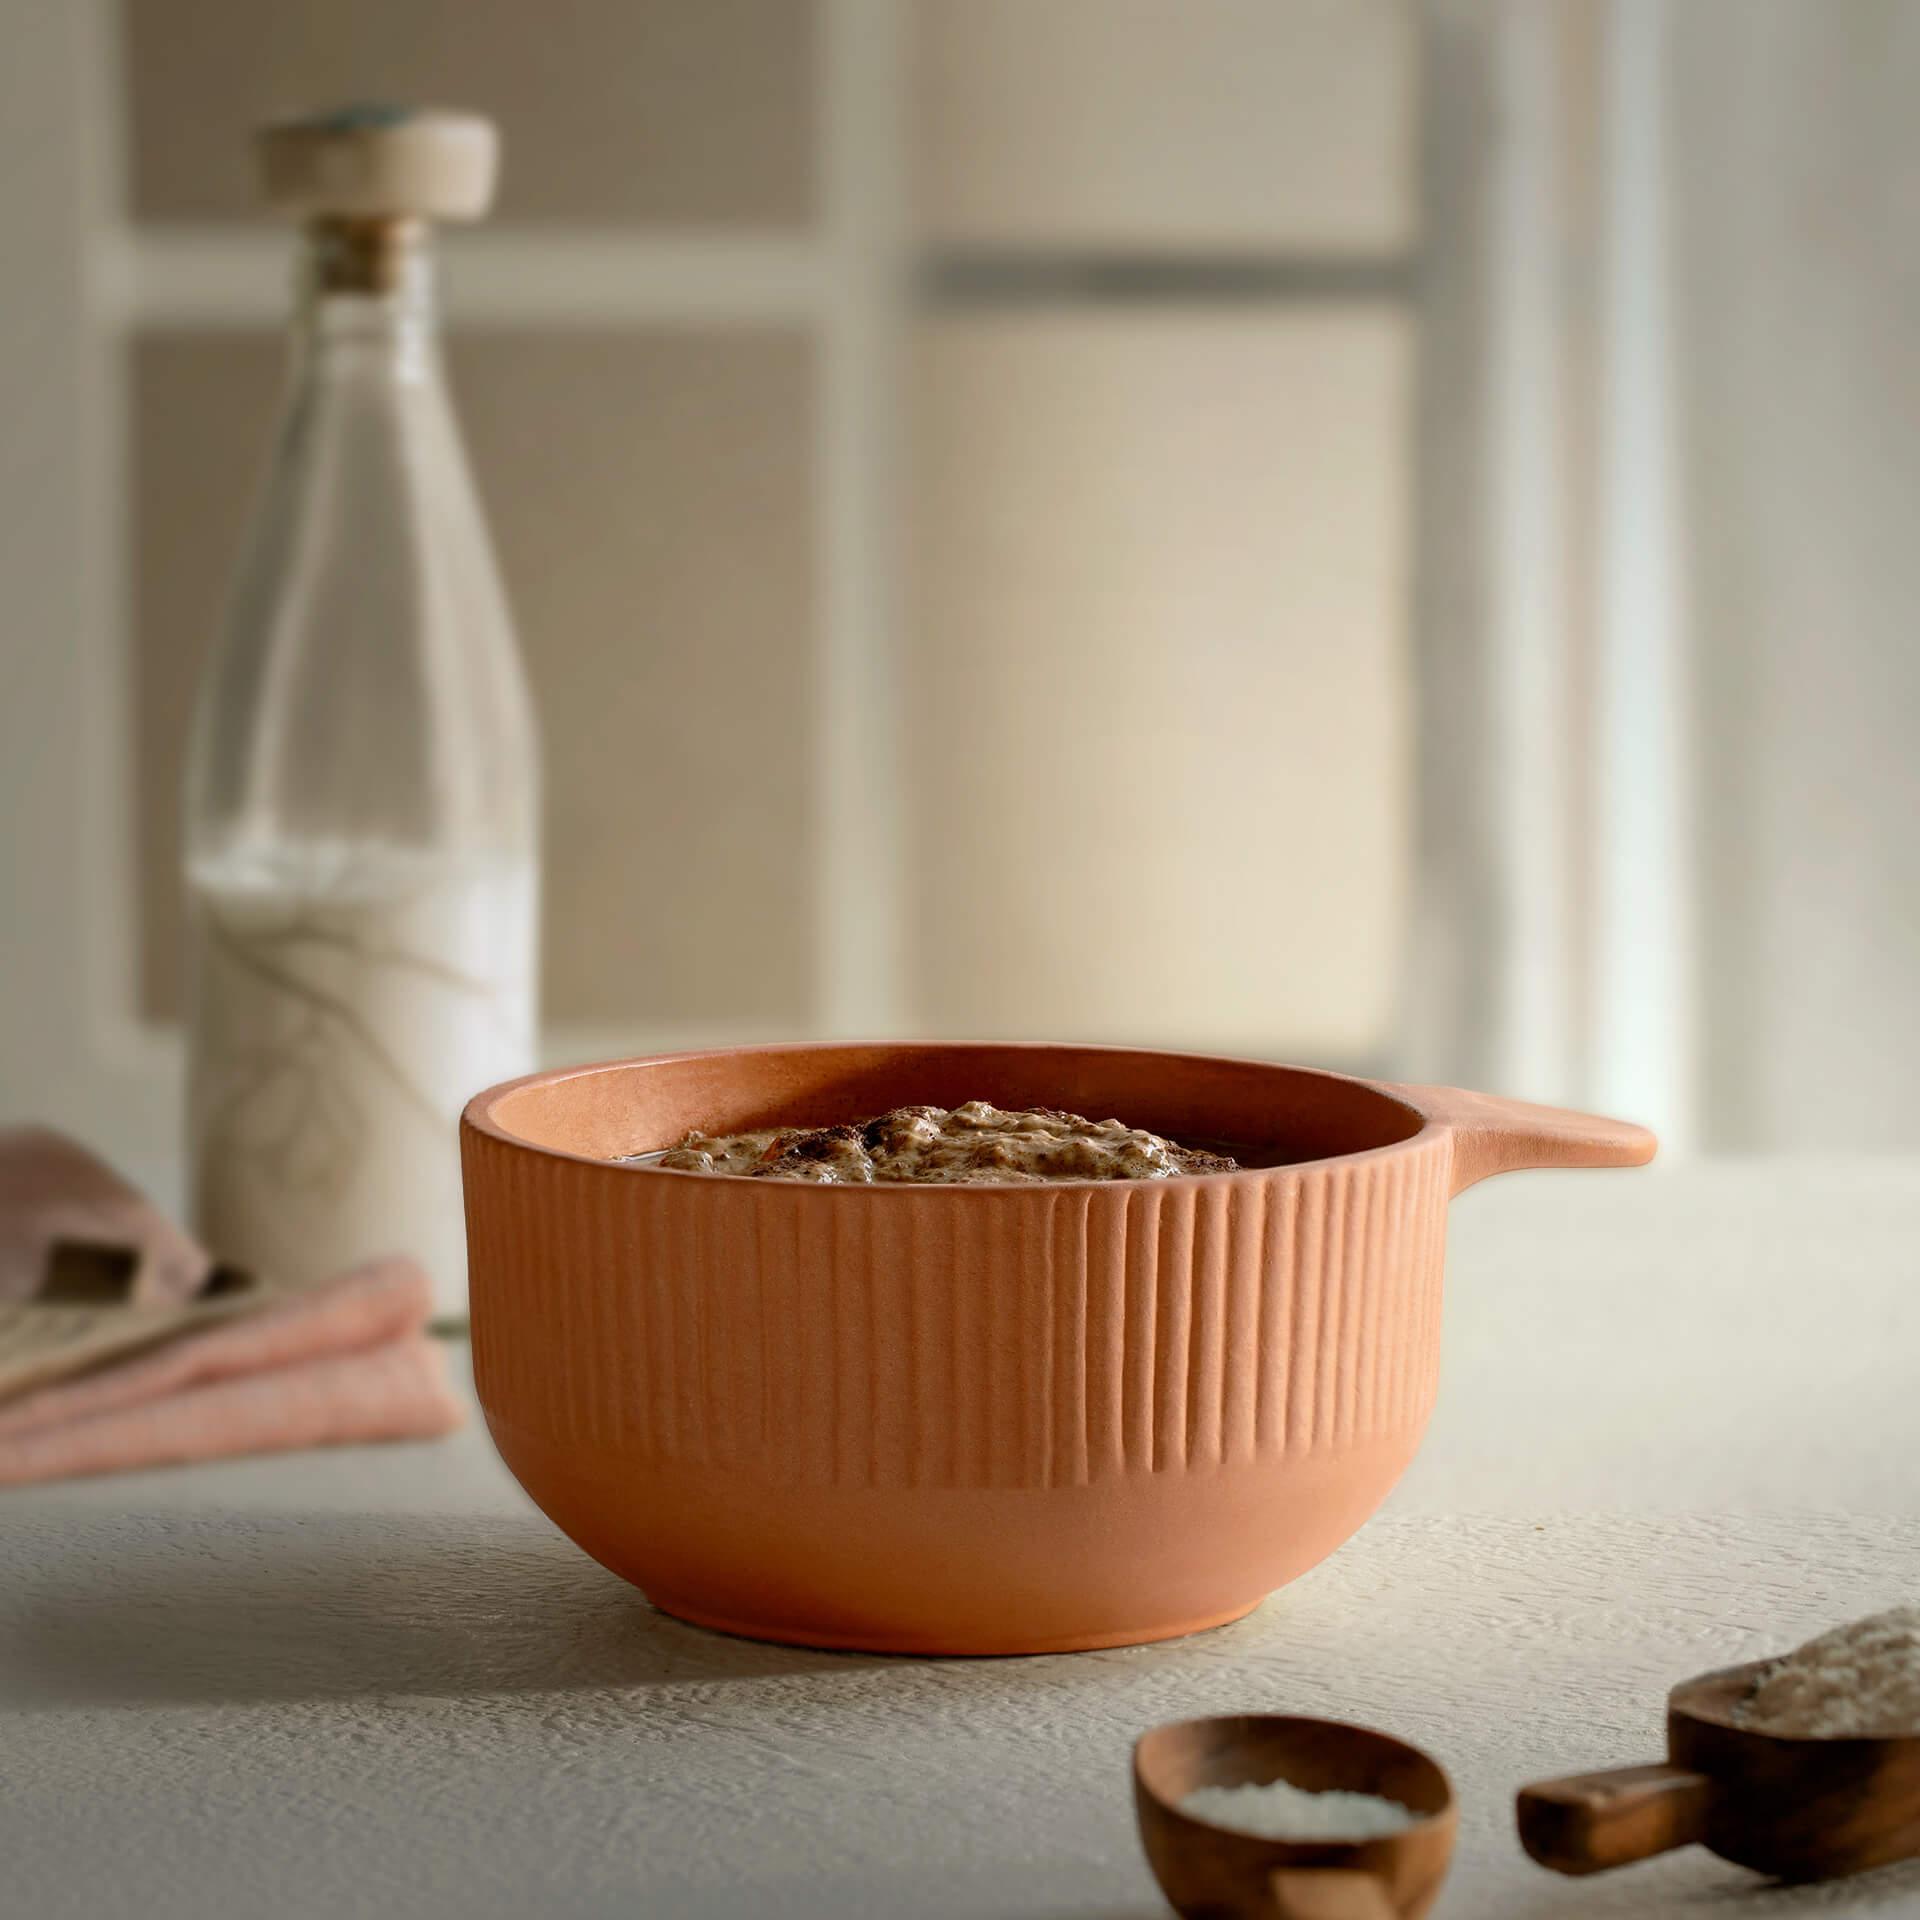 Sienna Terracotta Mixing Bowl (Small)